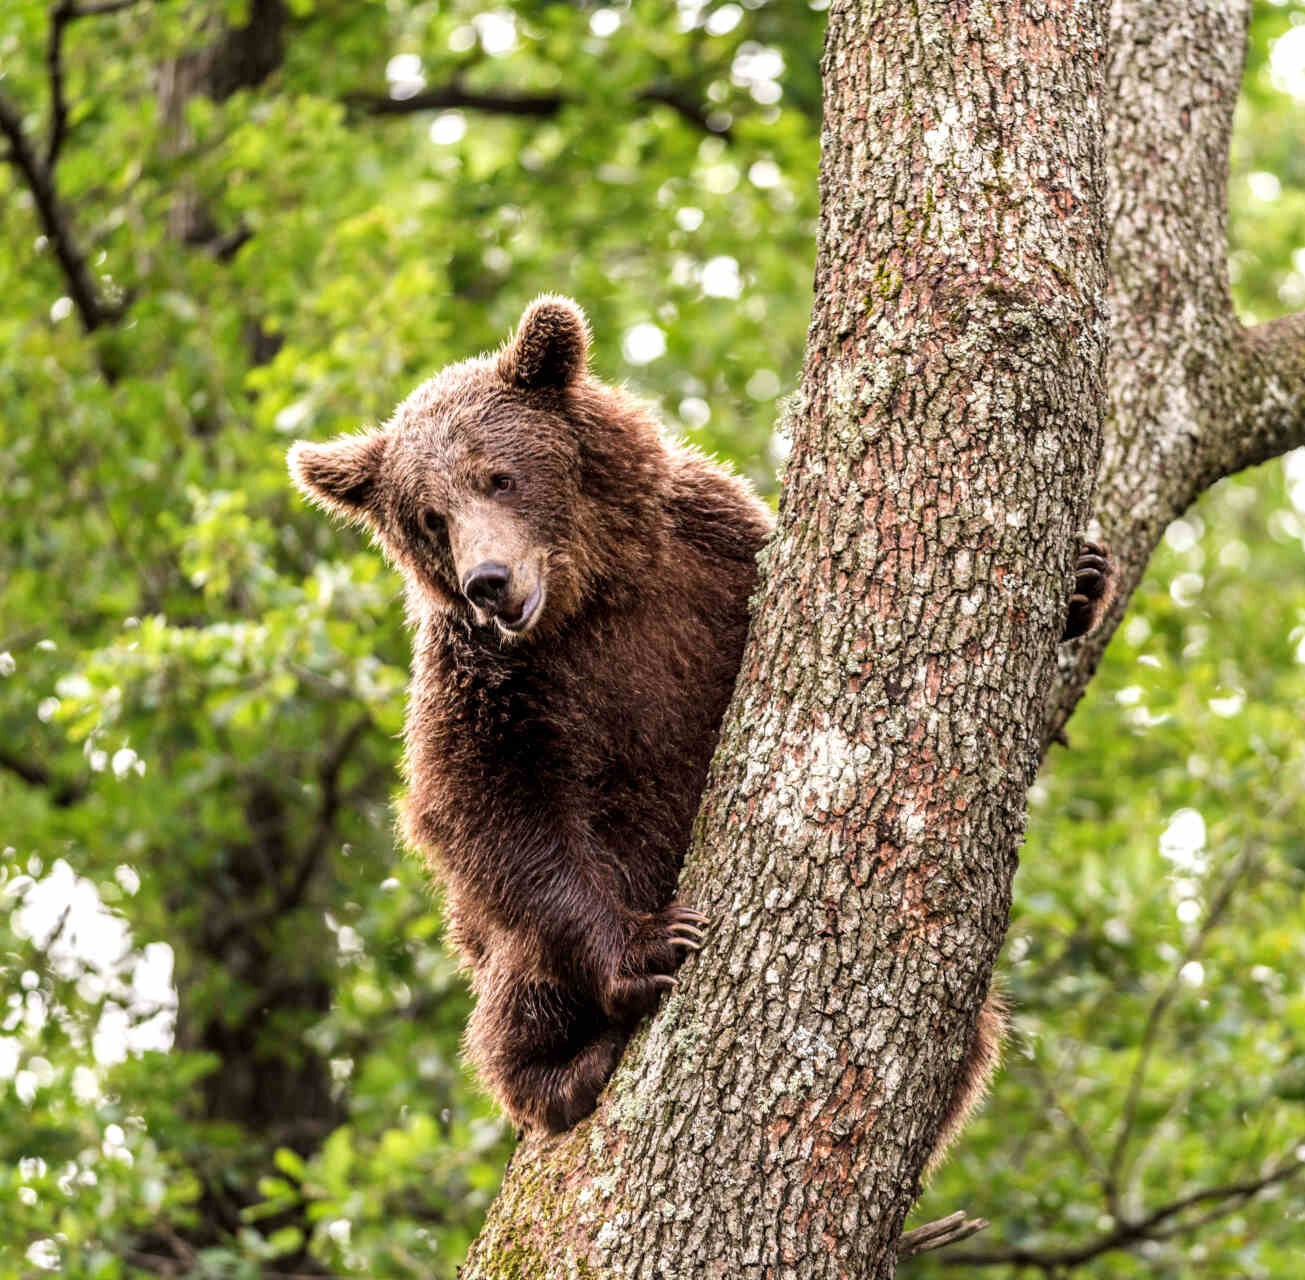 A bear at the sanctuary in Romania looks out over its new home